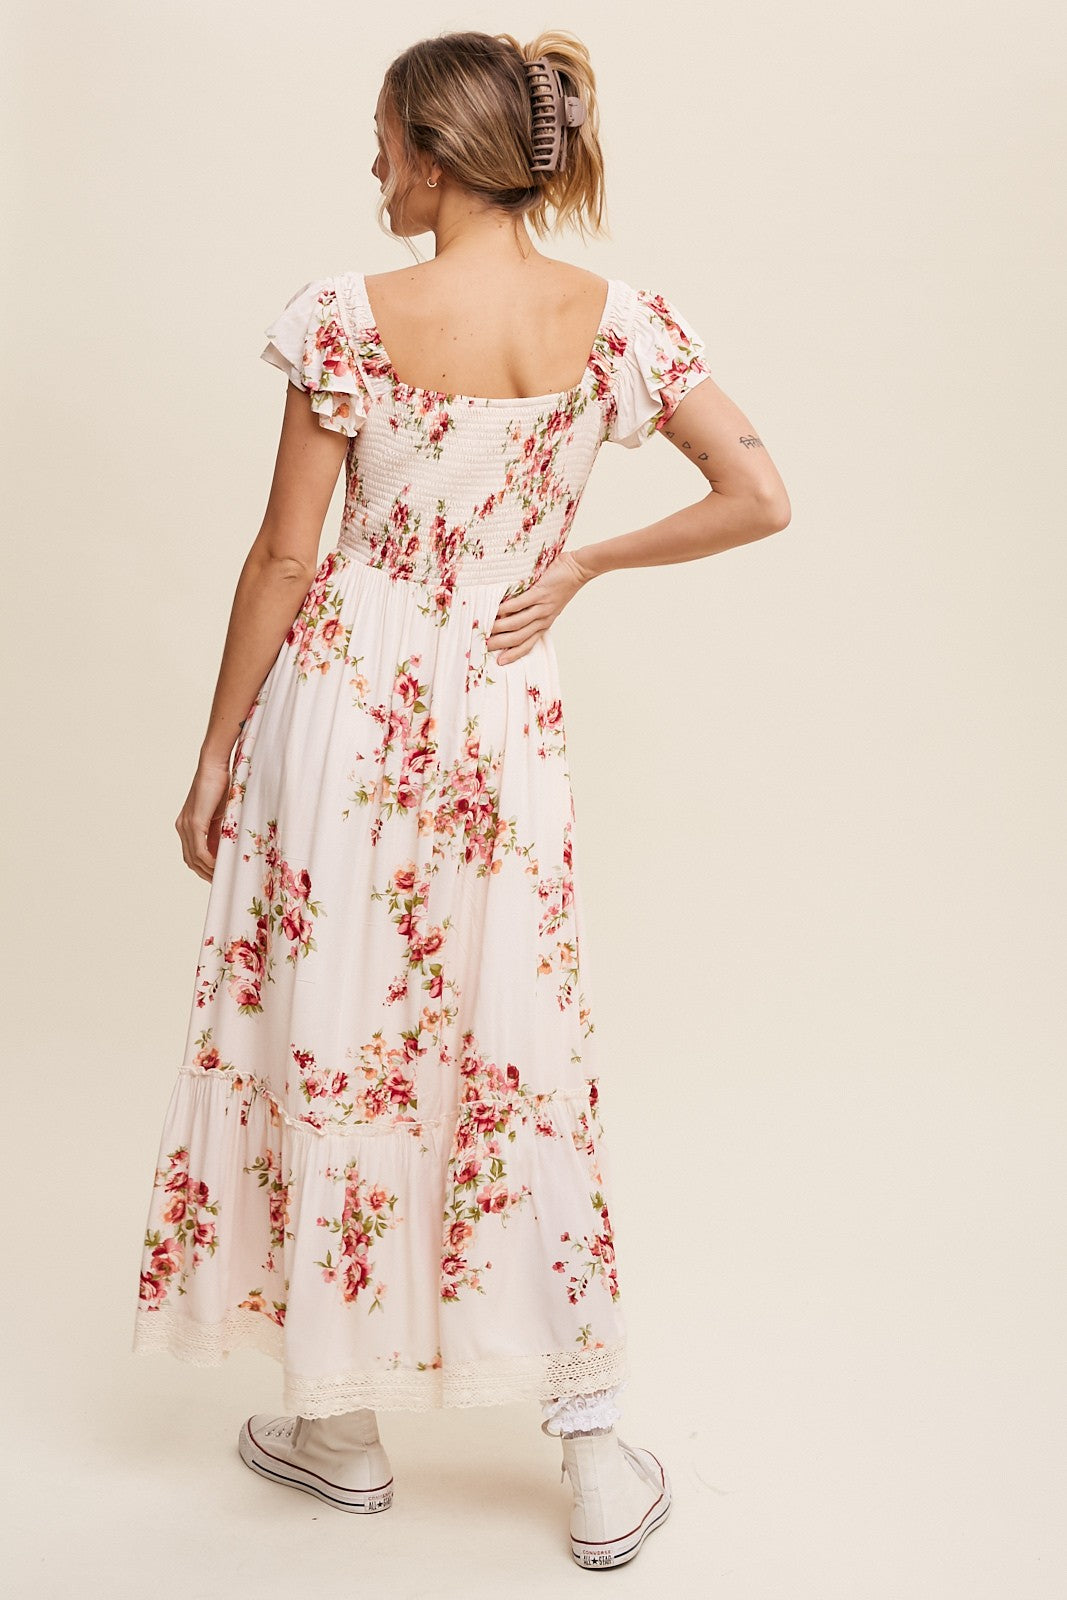 The Ivy Floral Maxi Dress